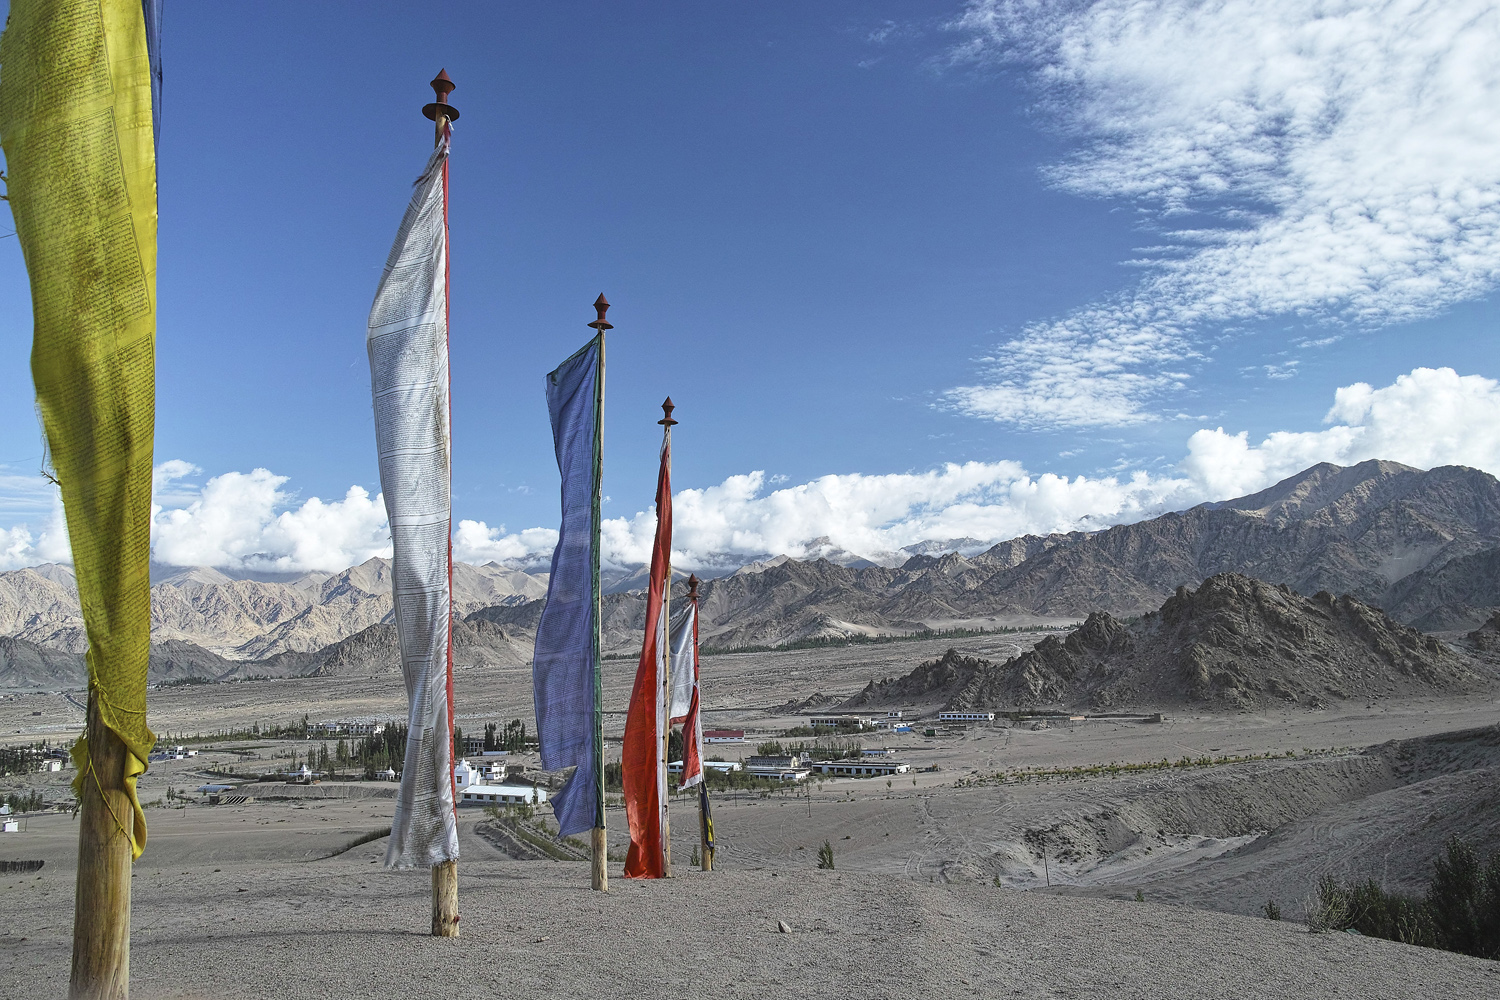 In the foothills of the Indian Himalayas you will find the remote city of Leh. This region used to be the seat of the ancient Buddhist kings, now it is a gateway for travellers to the Himalayas.